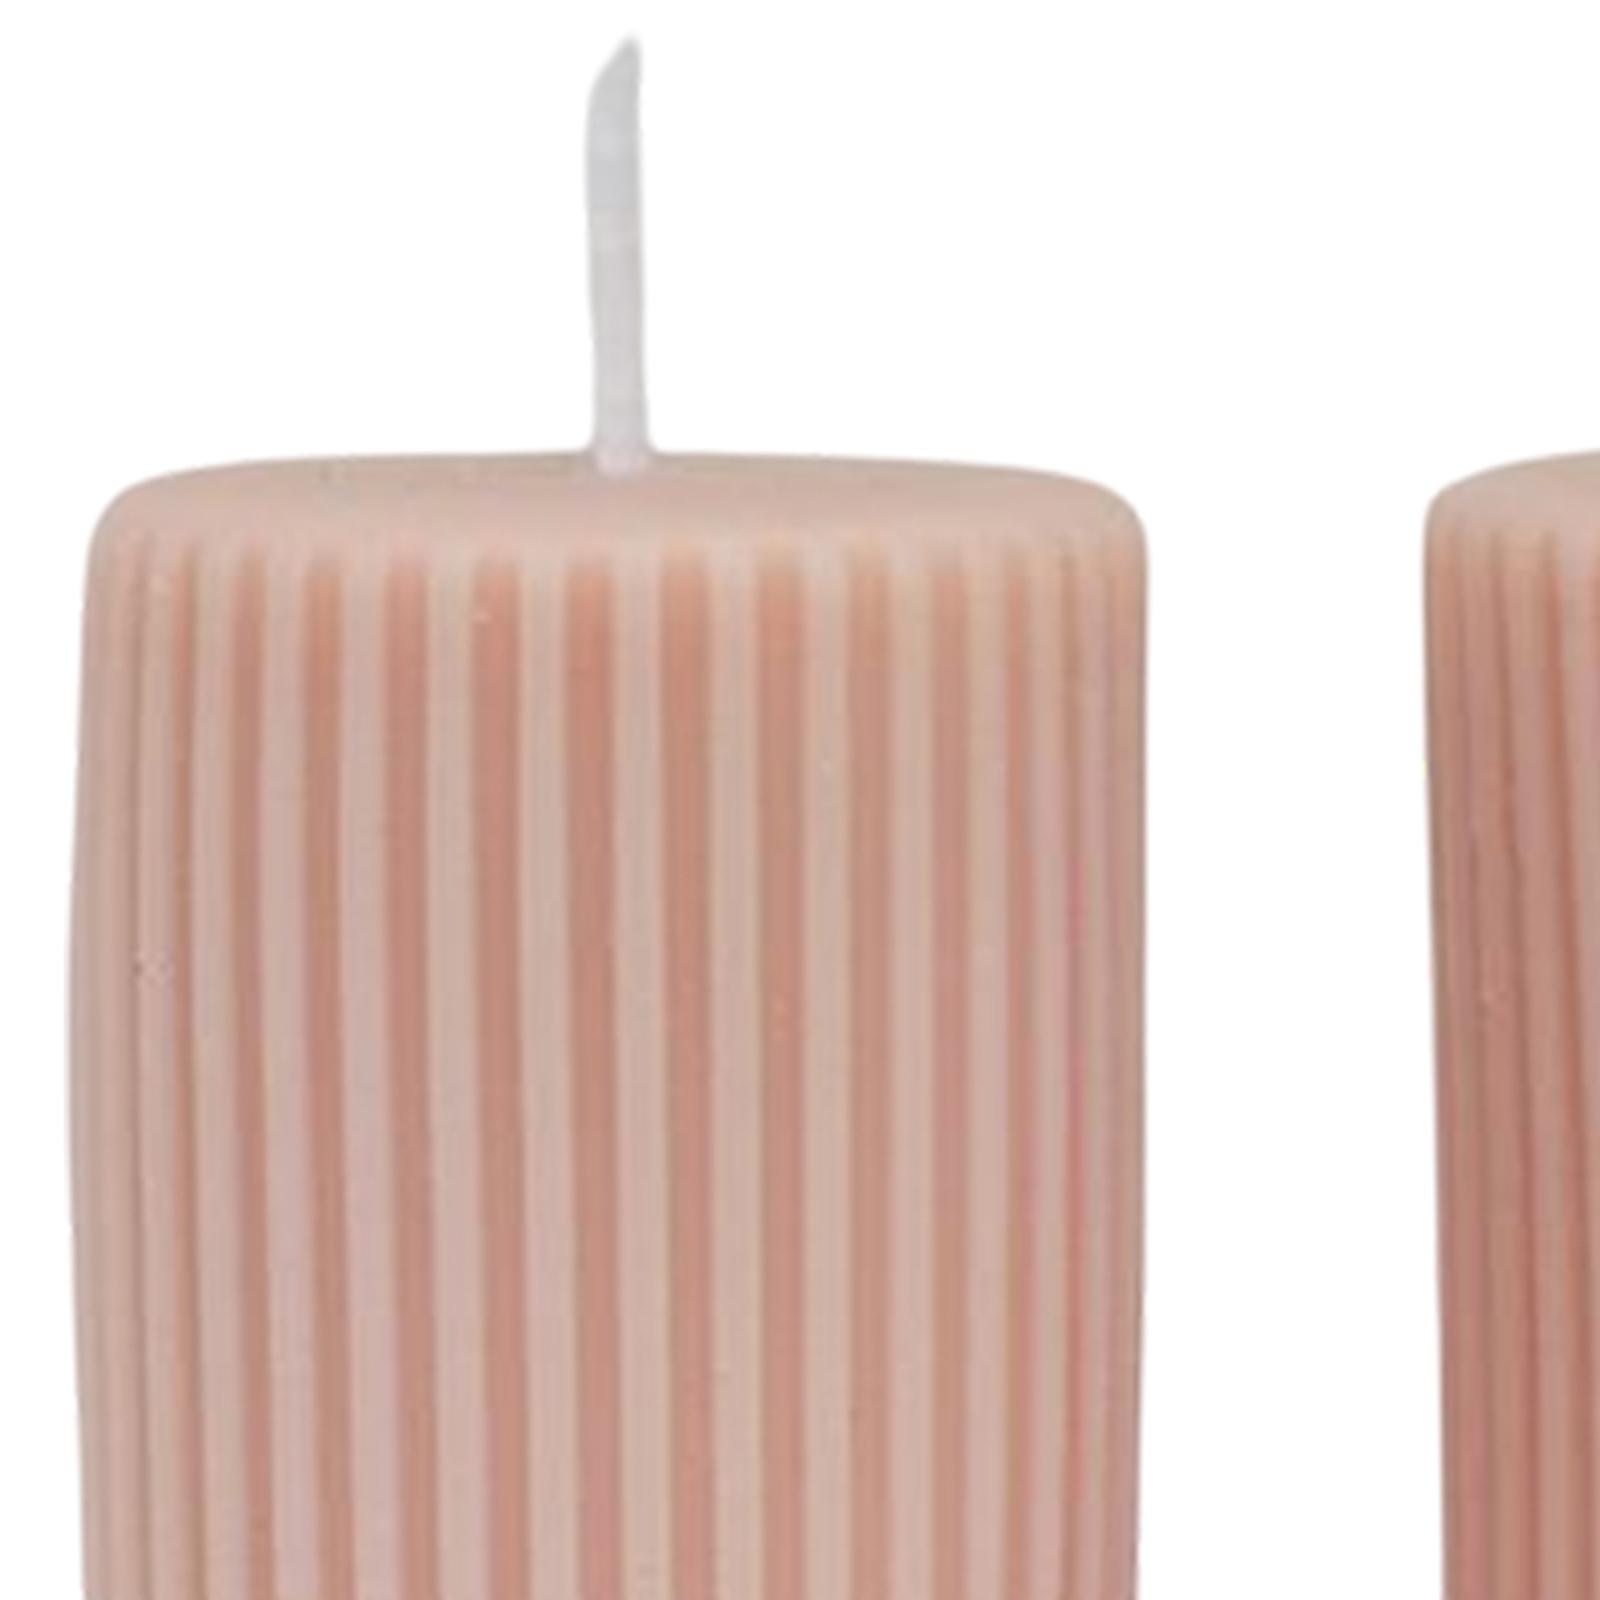 Geometric Scented Candles U Shaped Home Decorative Soy Wax Candle dark pink